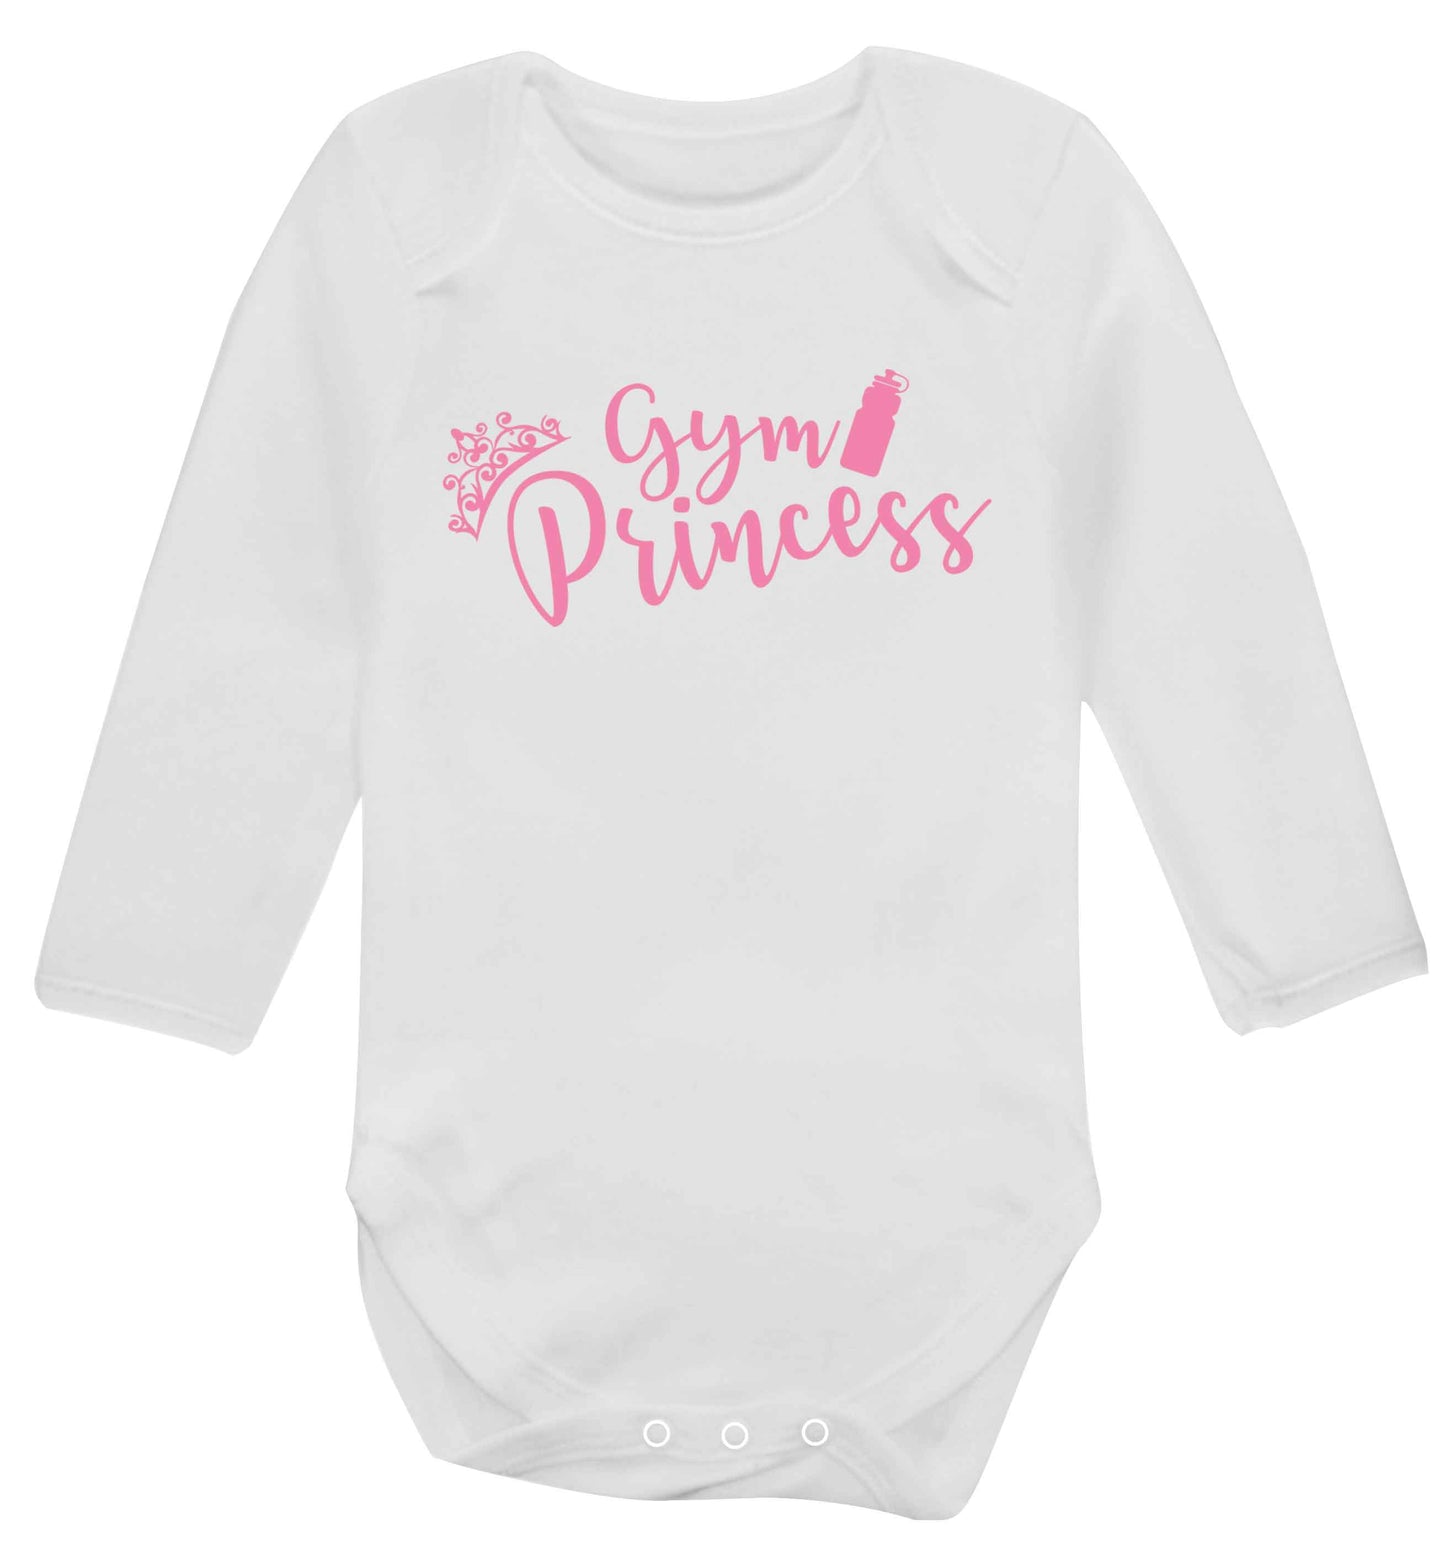 Gym princess Baby Vest long sleeved white 6-12 months